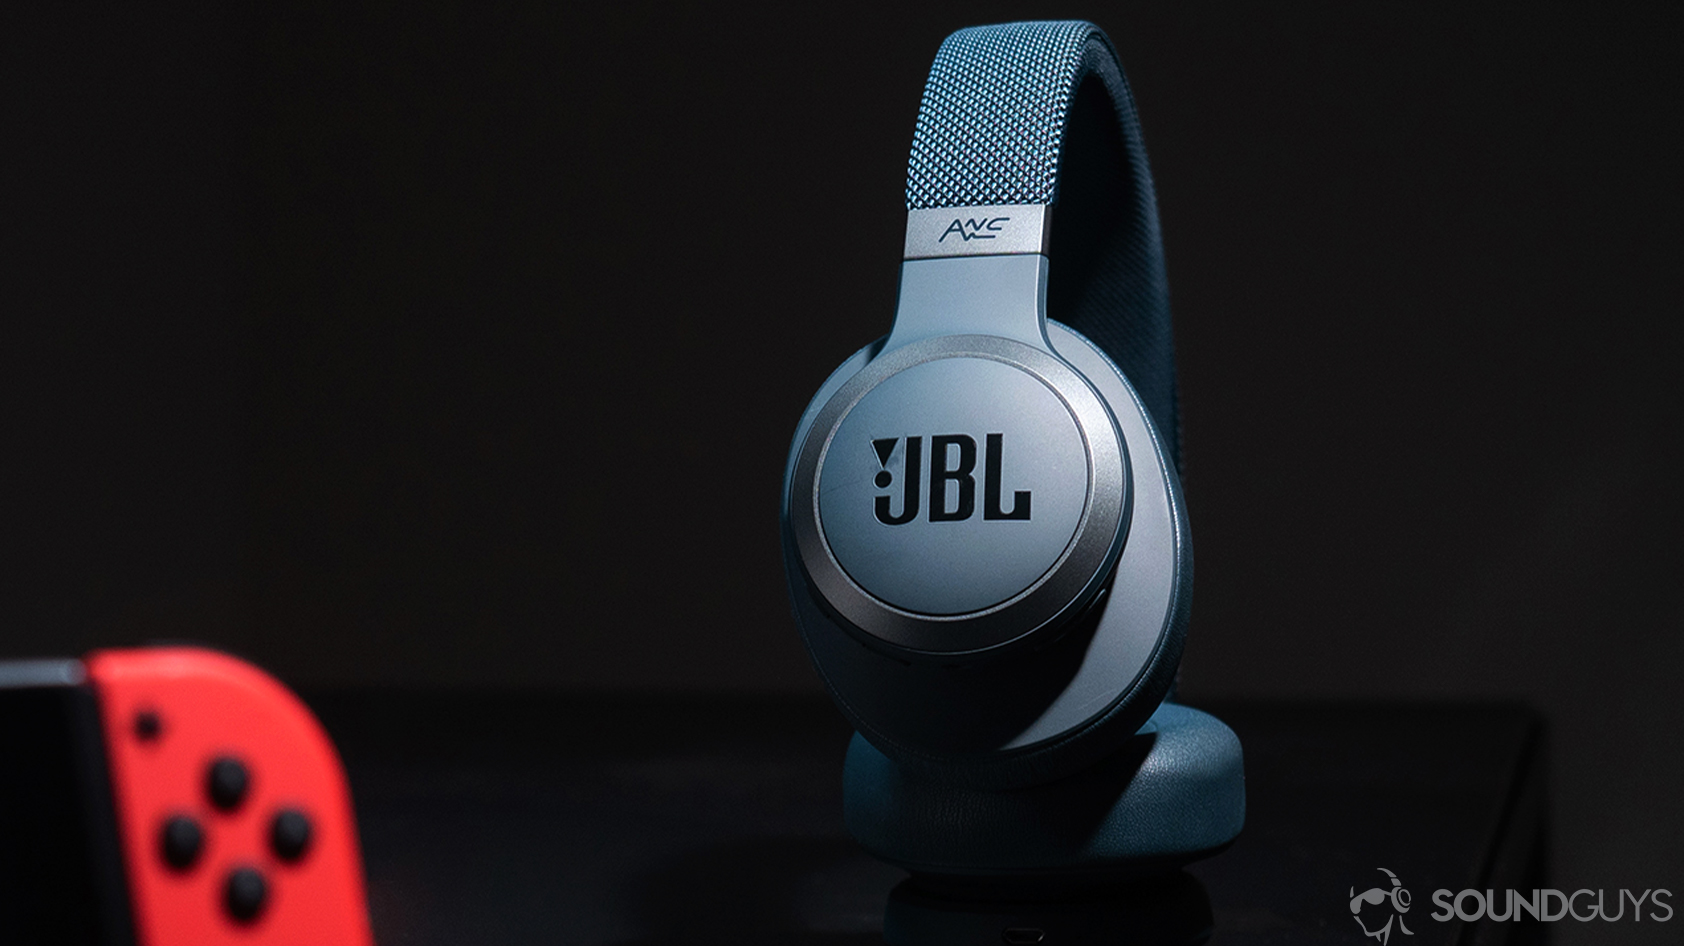 The JBL Live 650BTNC headphones with a Nintendo Switch in the foreground.